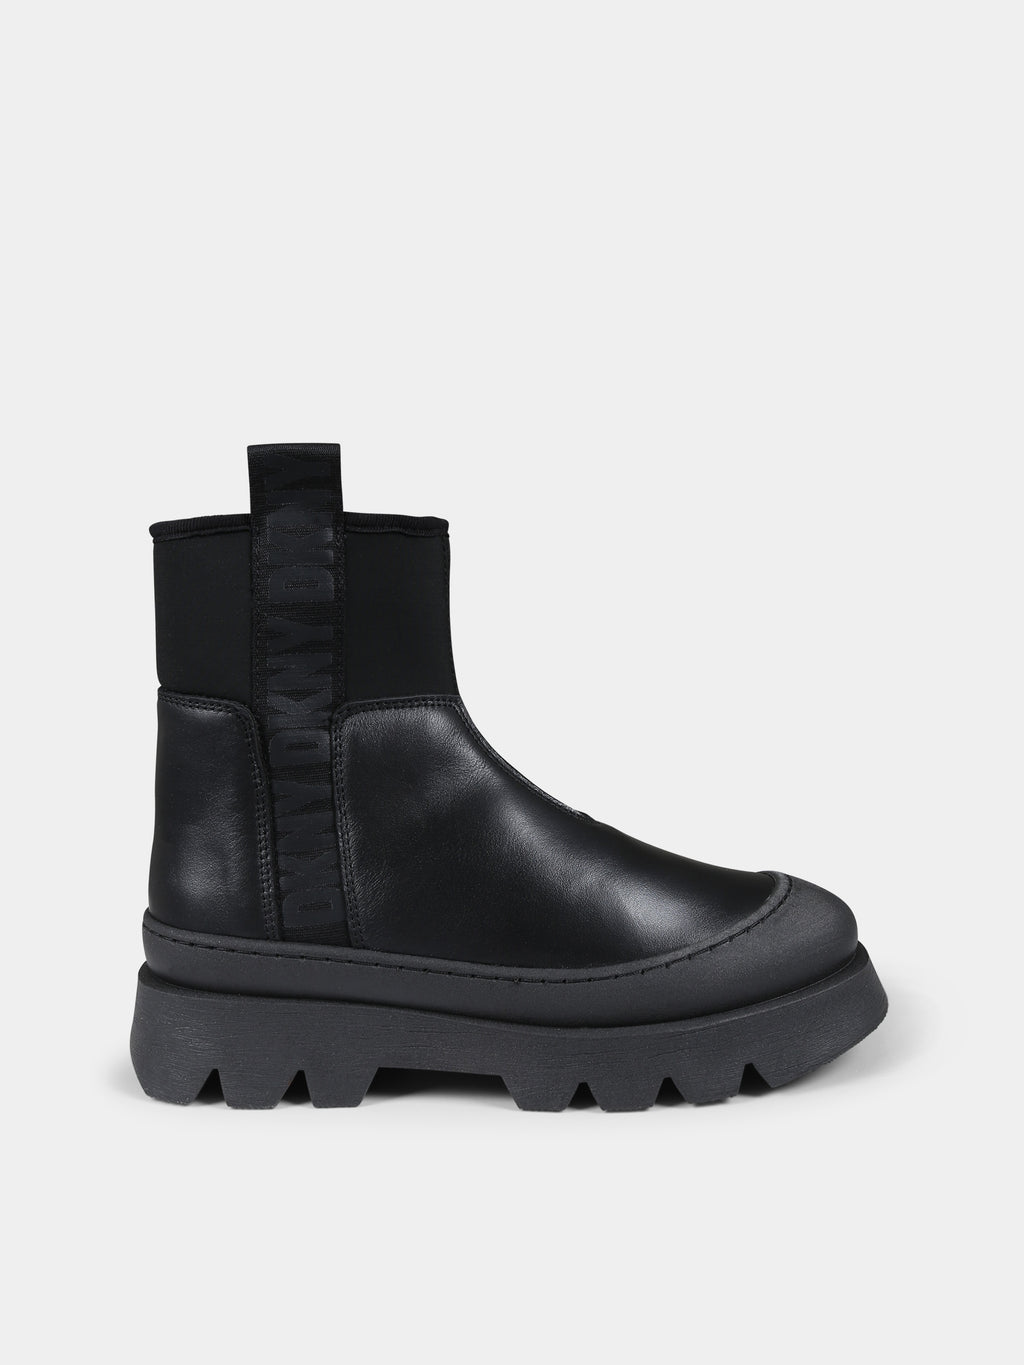 Black ankle boots for girl with logo